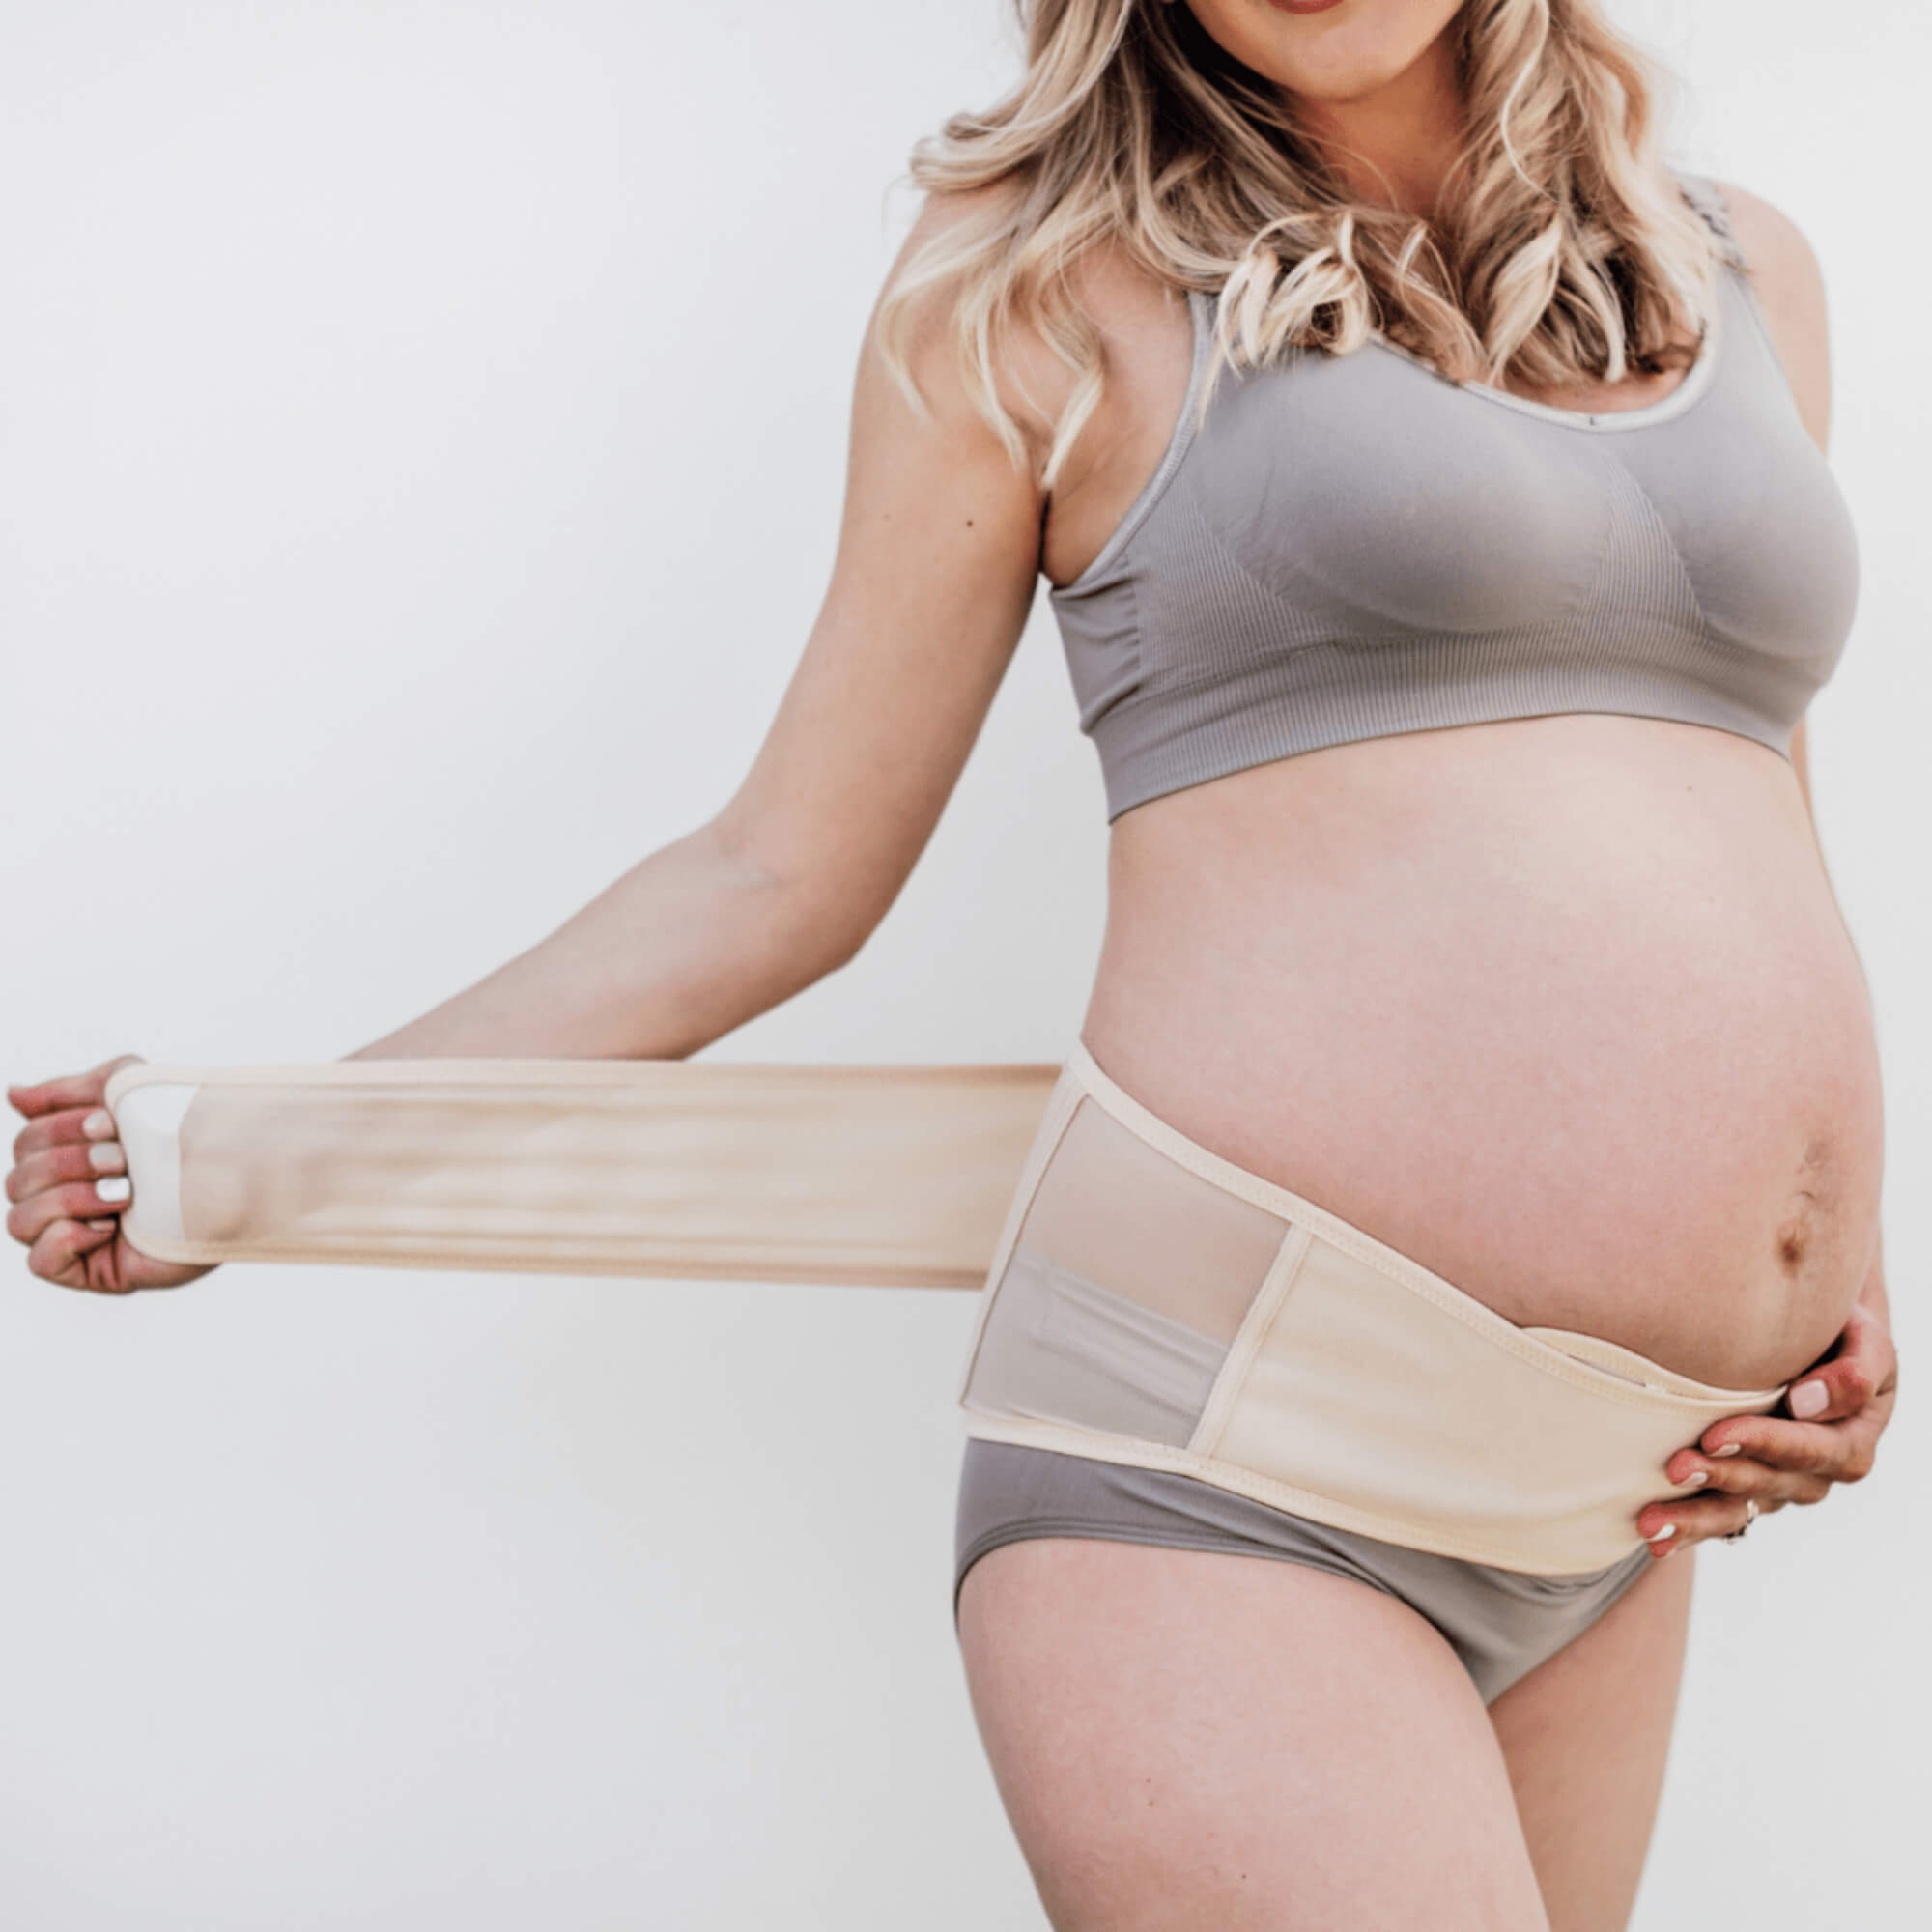 noola belly support during pregnancy nude maternity belts support bands 